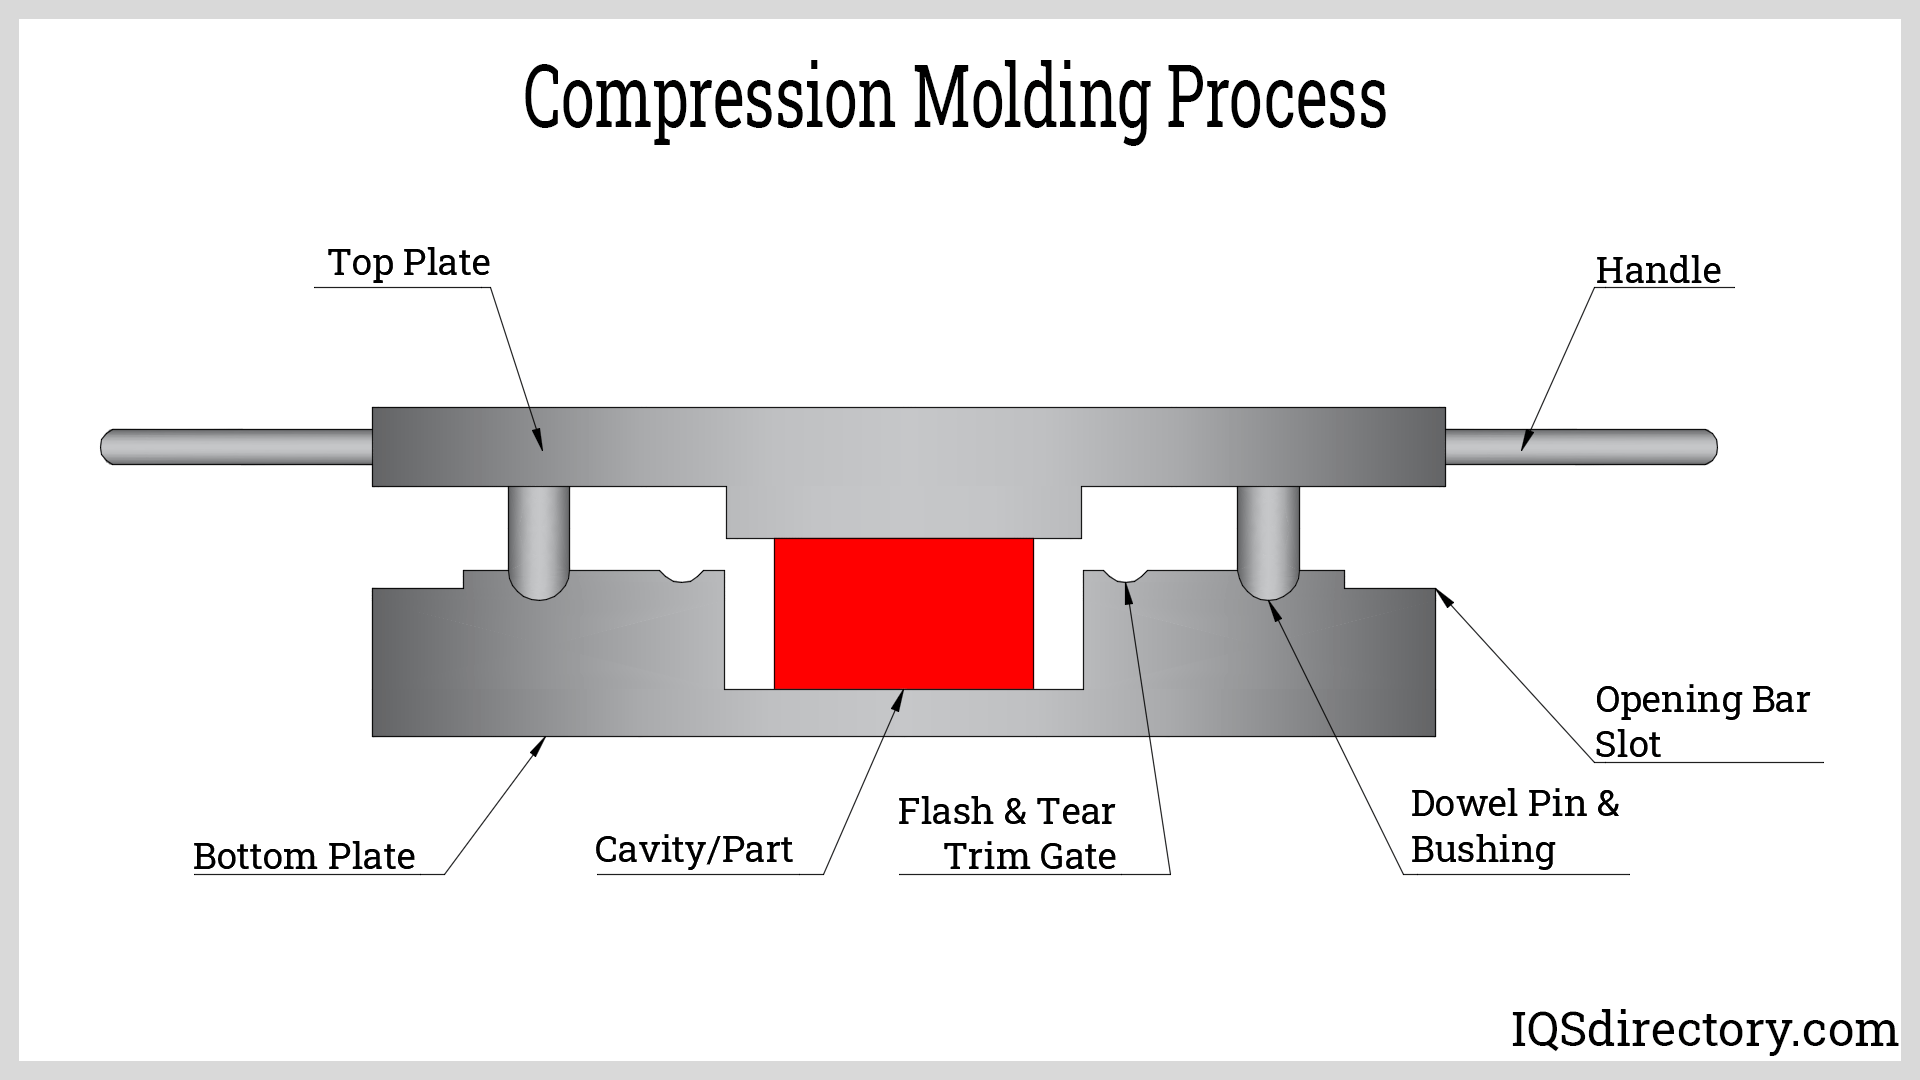 https://www.iqsdirectory.com/articles/rubber-molding/compression-molding/compression-molding-process.gif